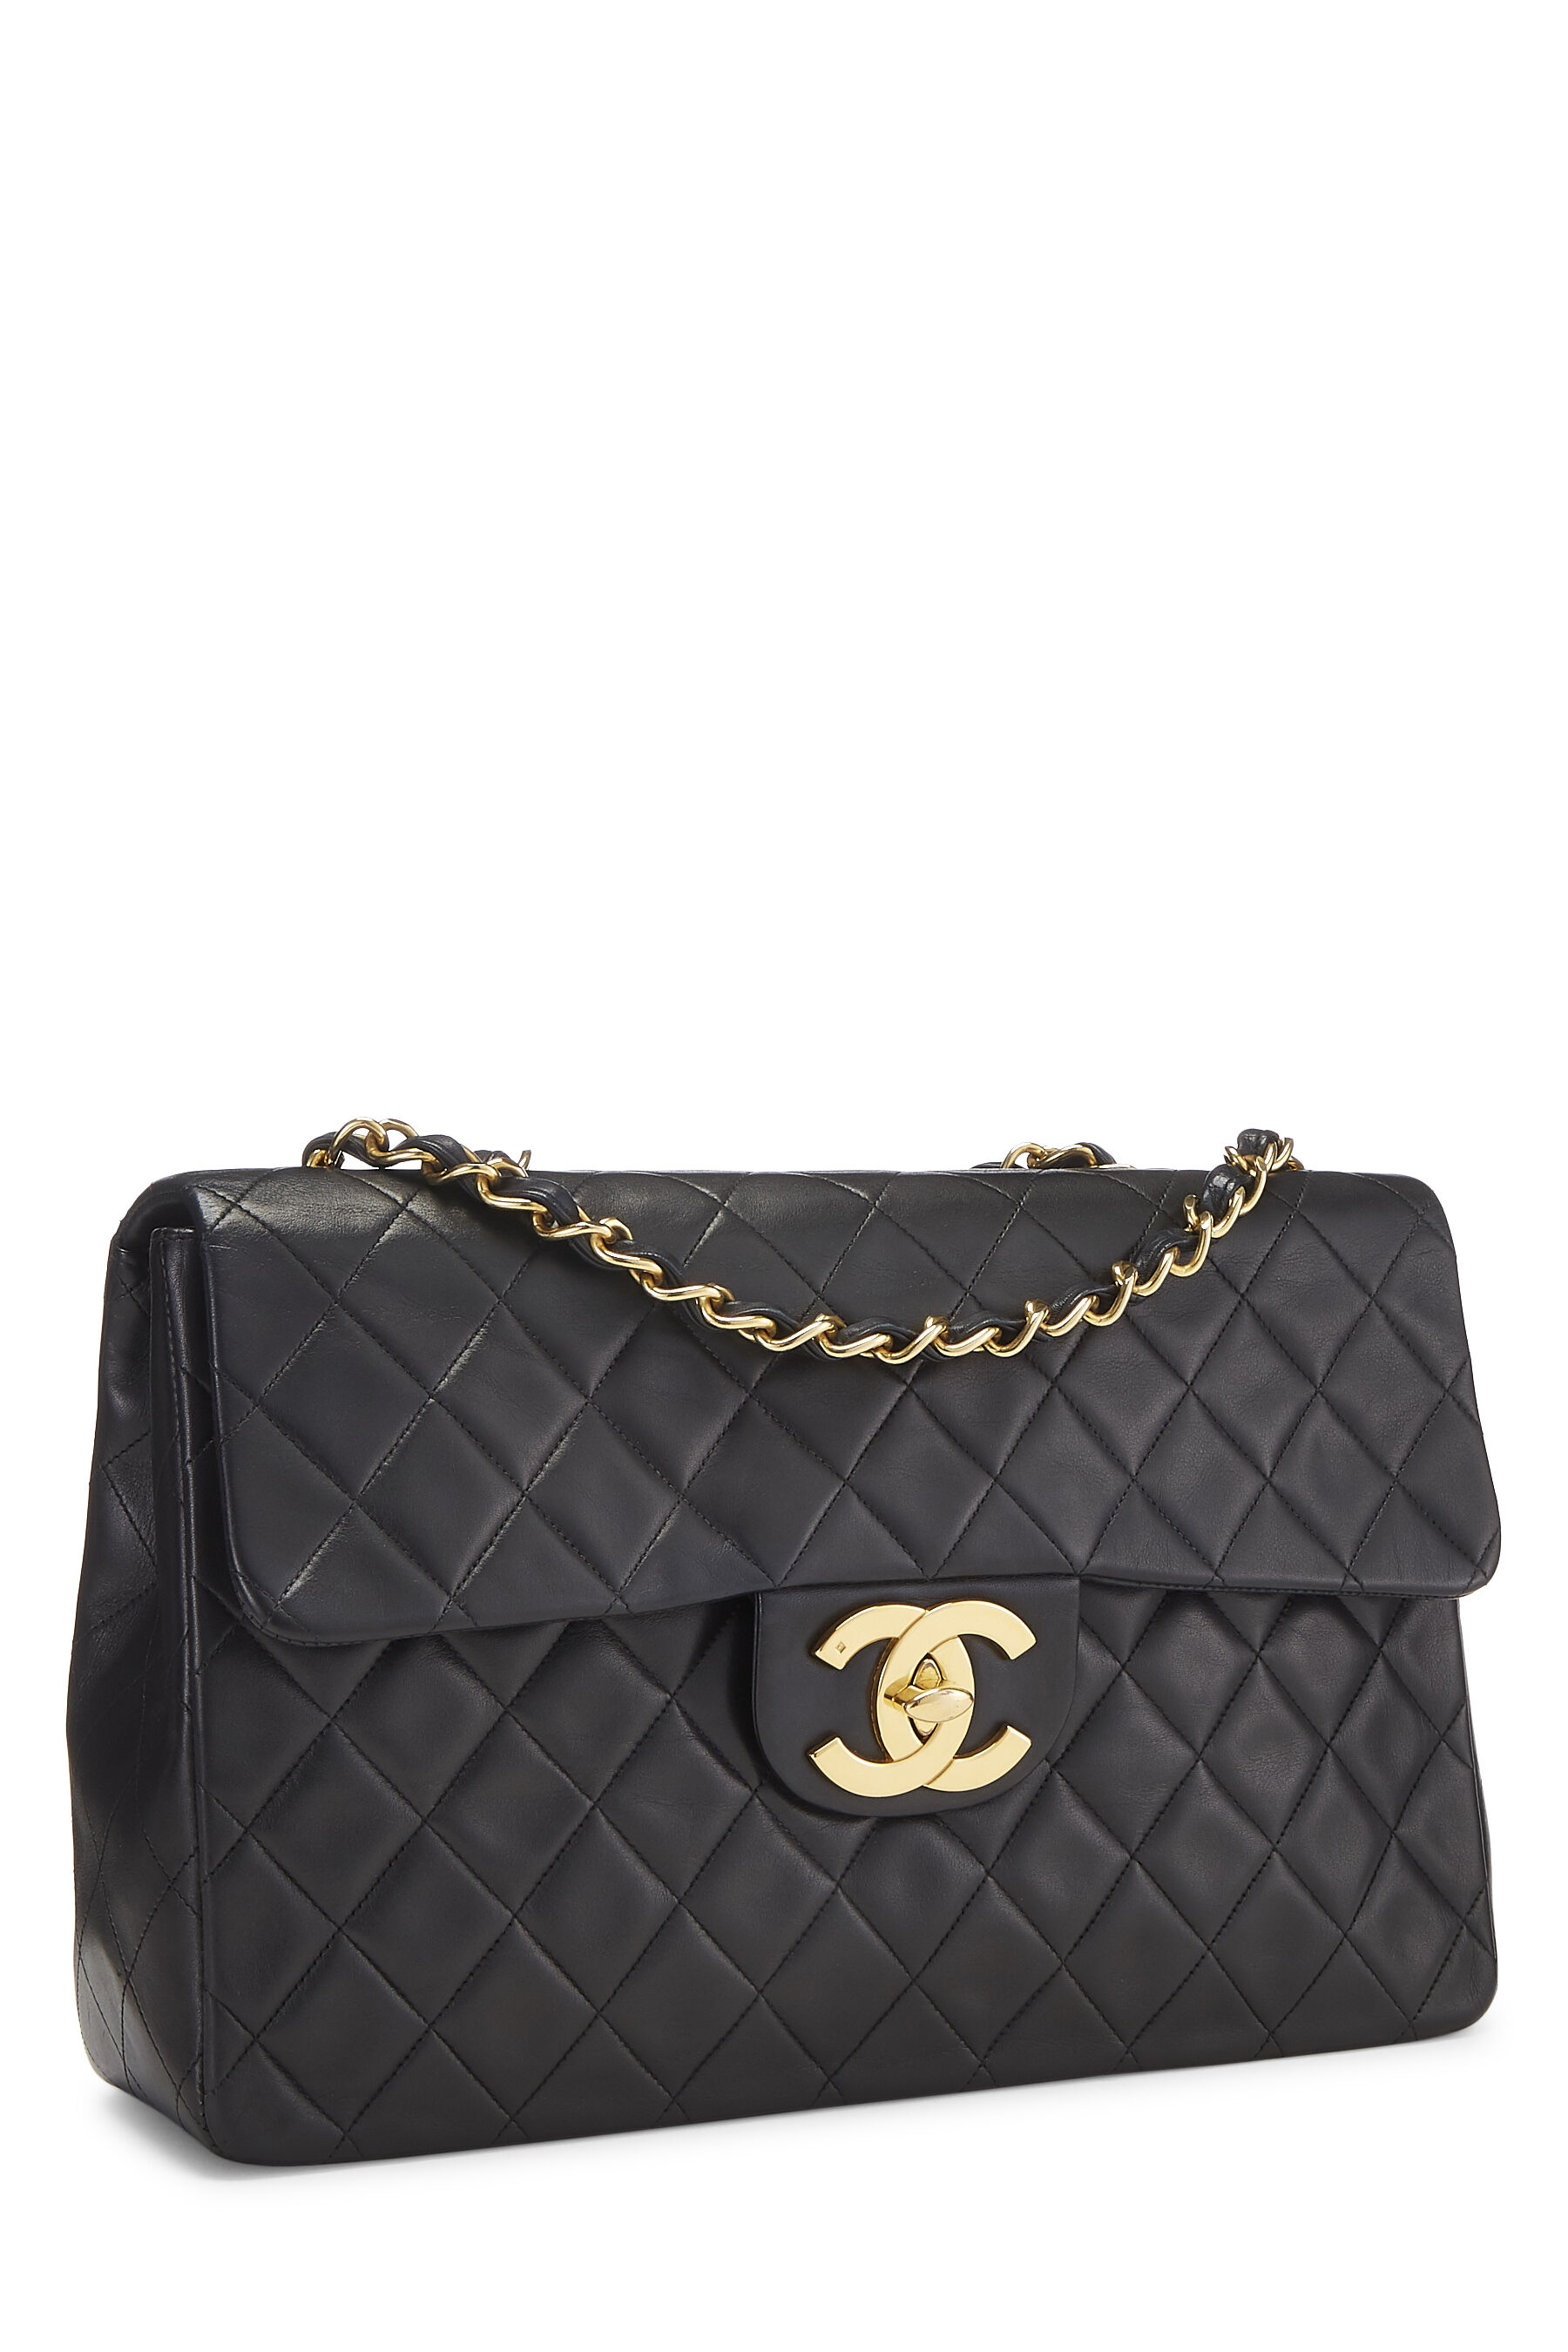 Chanel Timeless Maxi Jumbo flap shoulder bag in black quilted